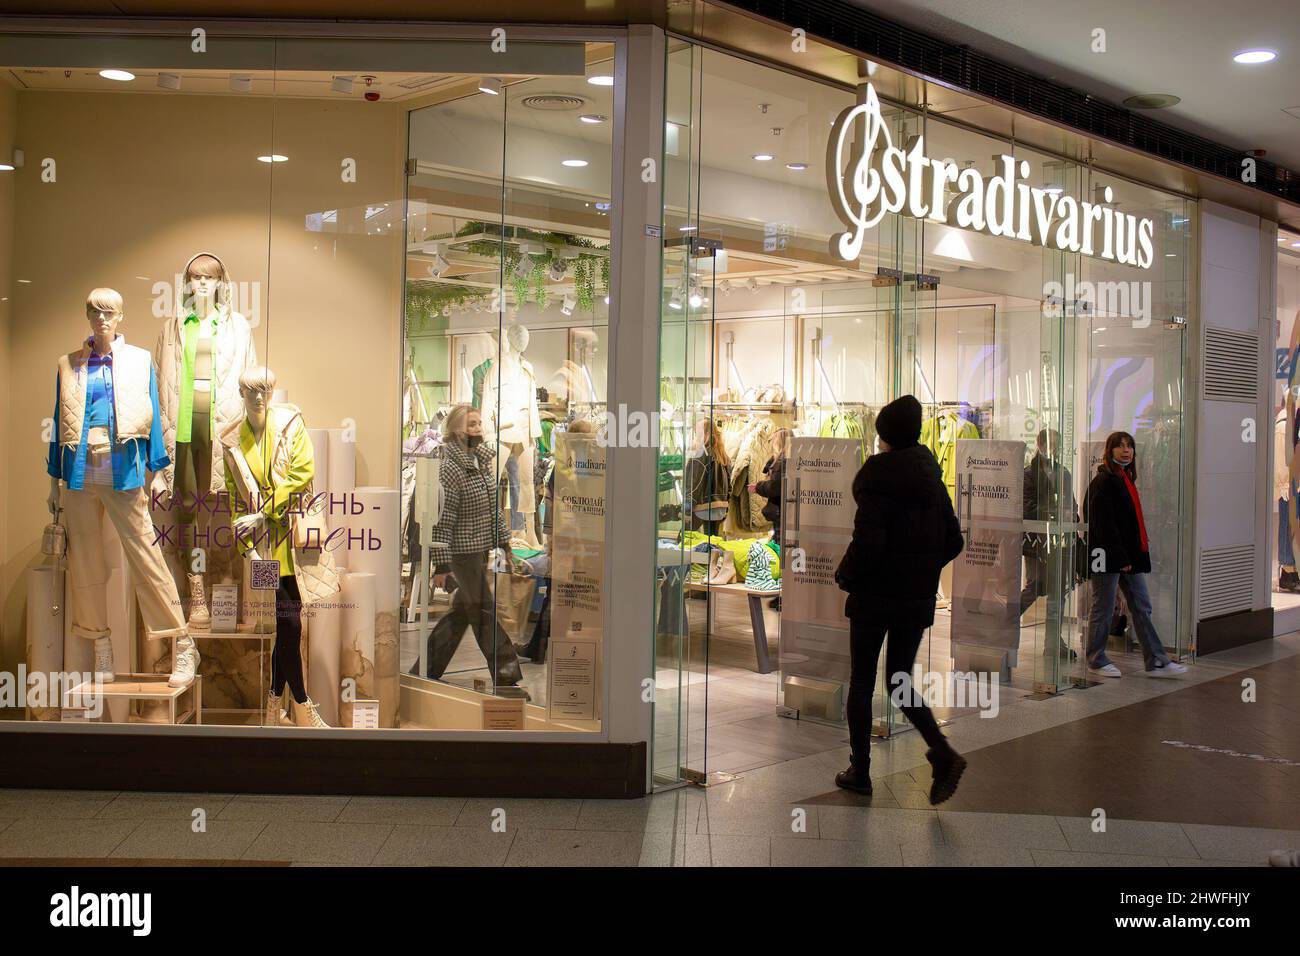 A shopper enters a Stradivarius boutique in Moscow. The Spanish fashion  retailer Inditex, which owns such brands as Zara, Bershka, Pull&Bear,  Massimo Dutti, Stradivarius, and others, announced it was halting trading in